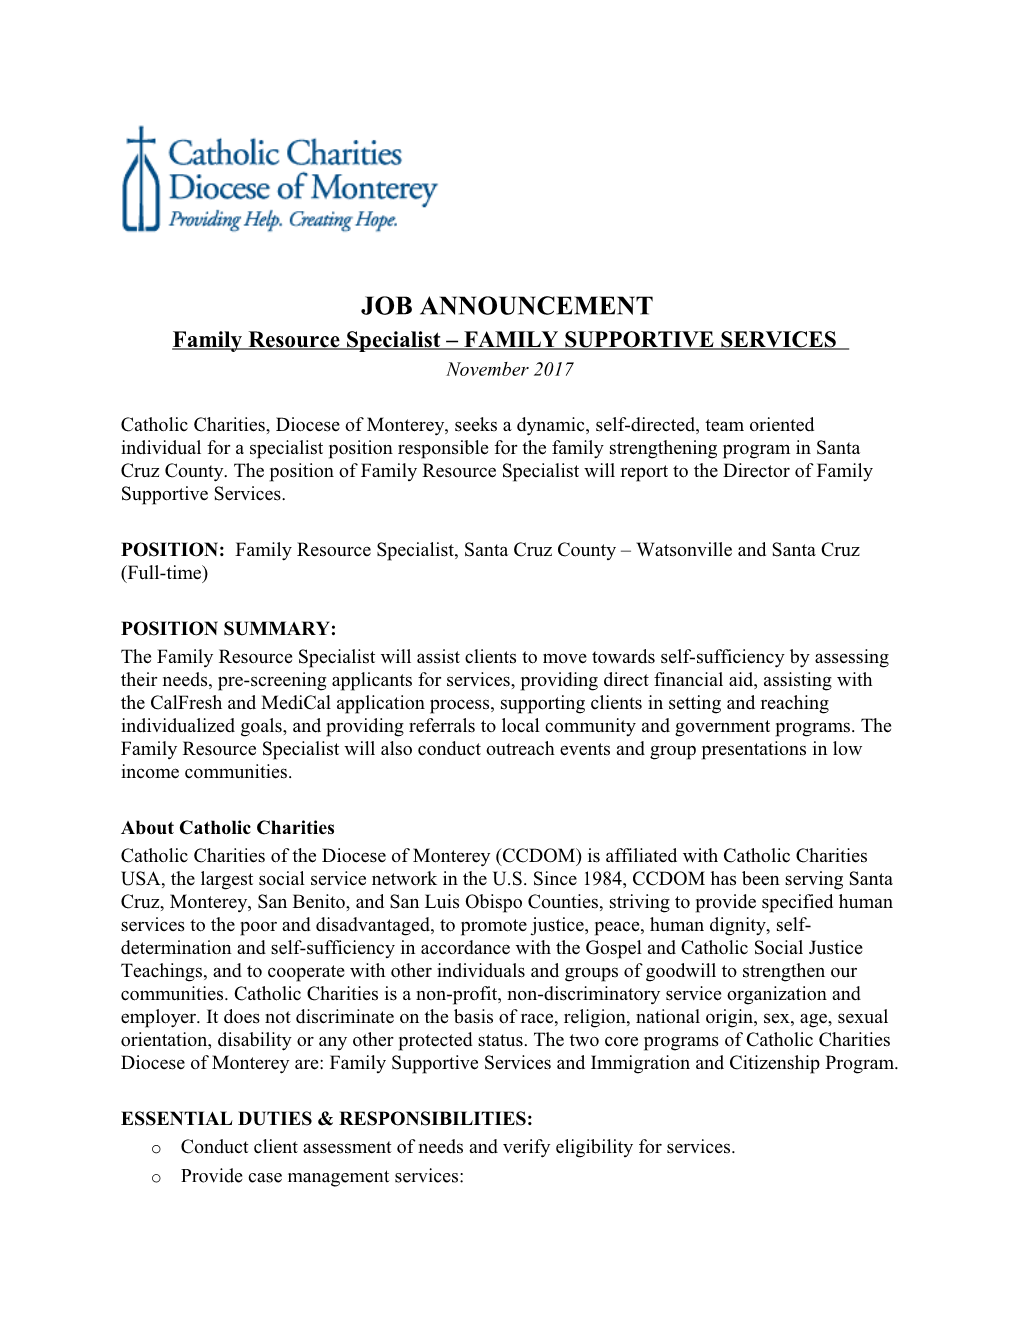 Family Resource Specialist FAMILY SUPPORTIVE SERVICES